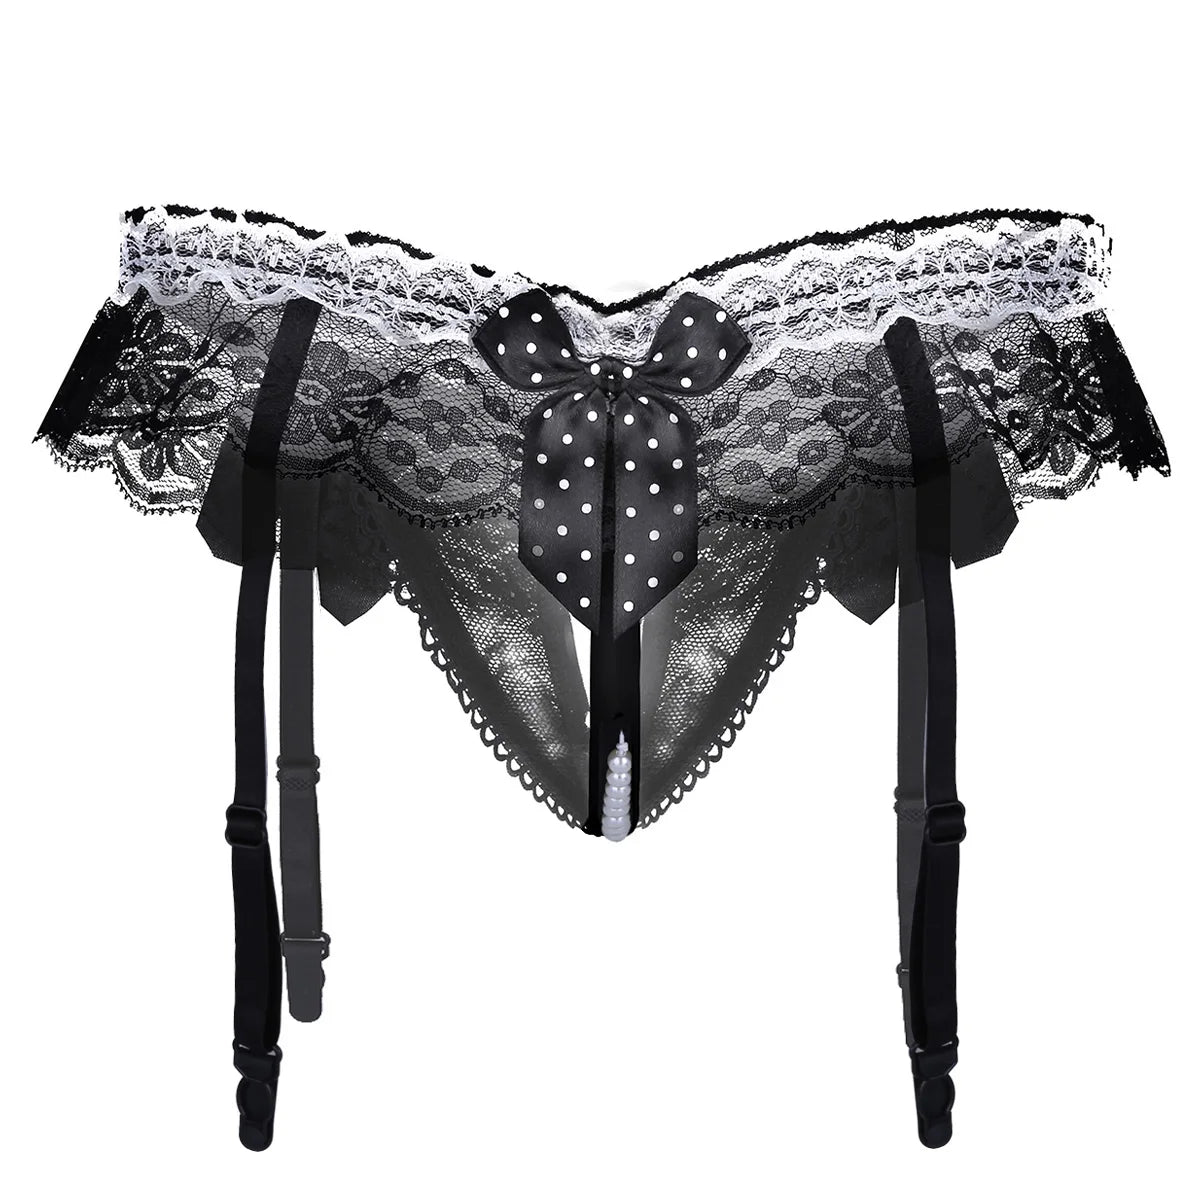 Sissy Lace Crotchless Panties - Lingerie - Twisted Jezebel